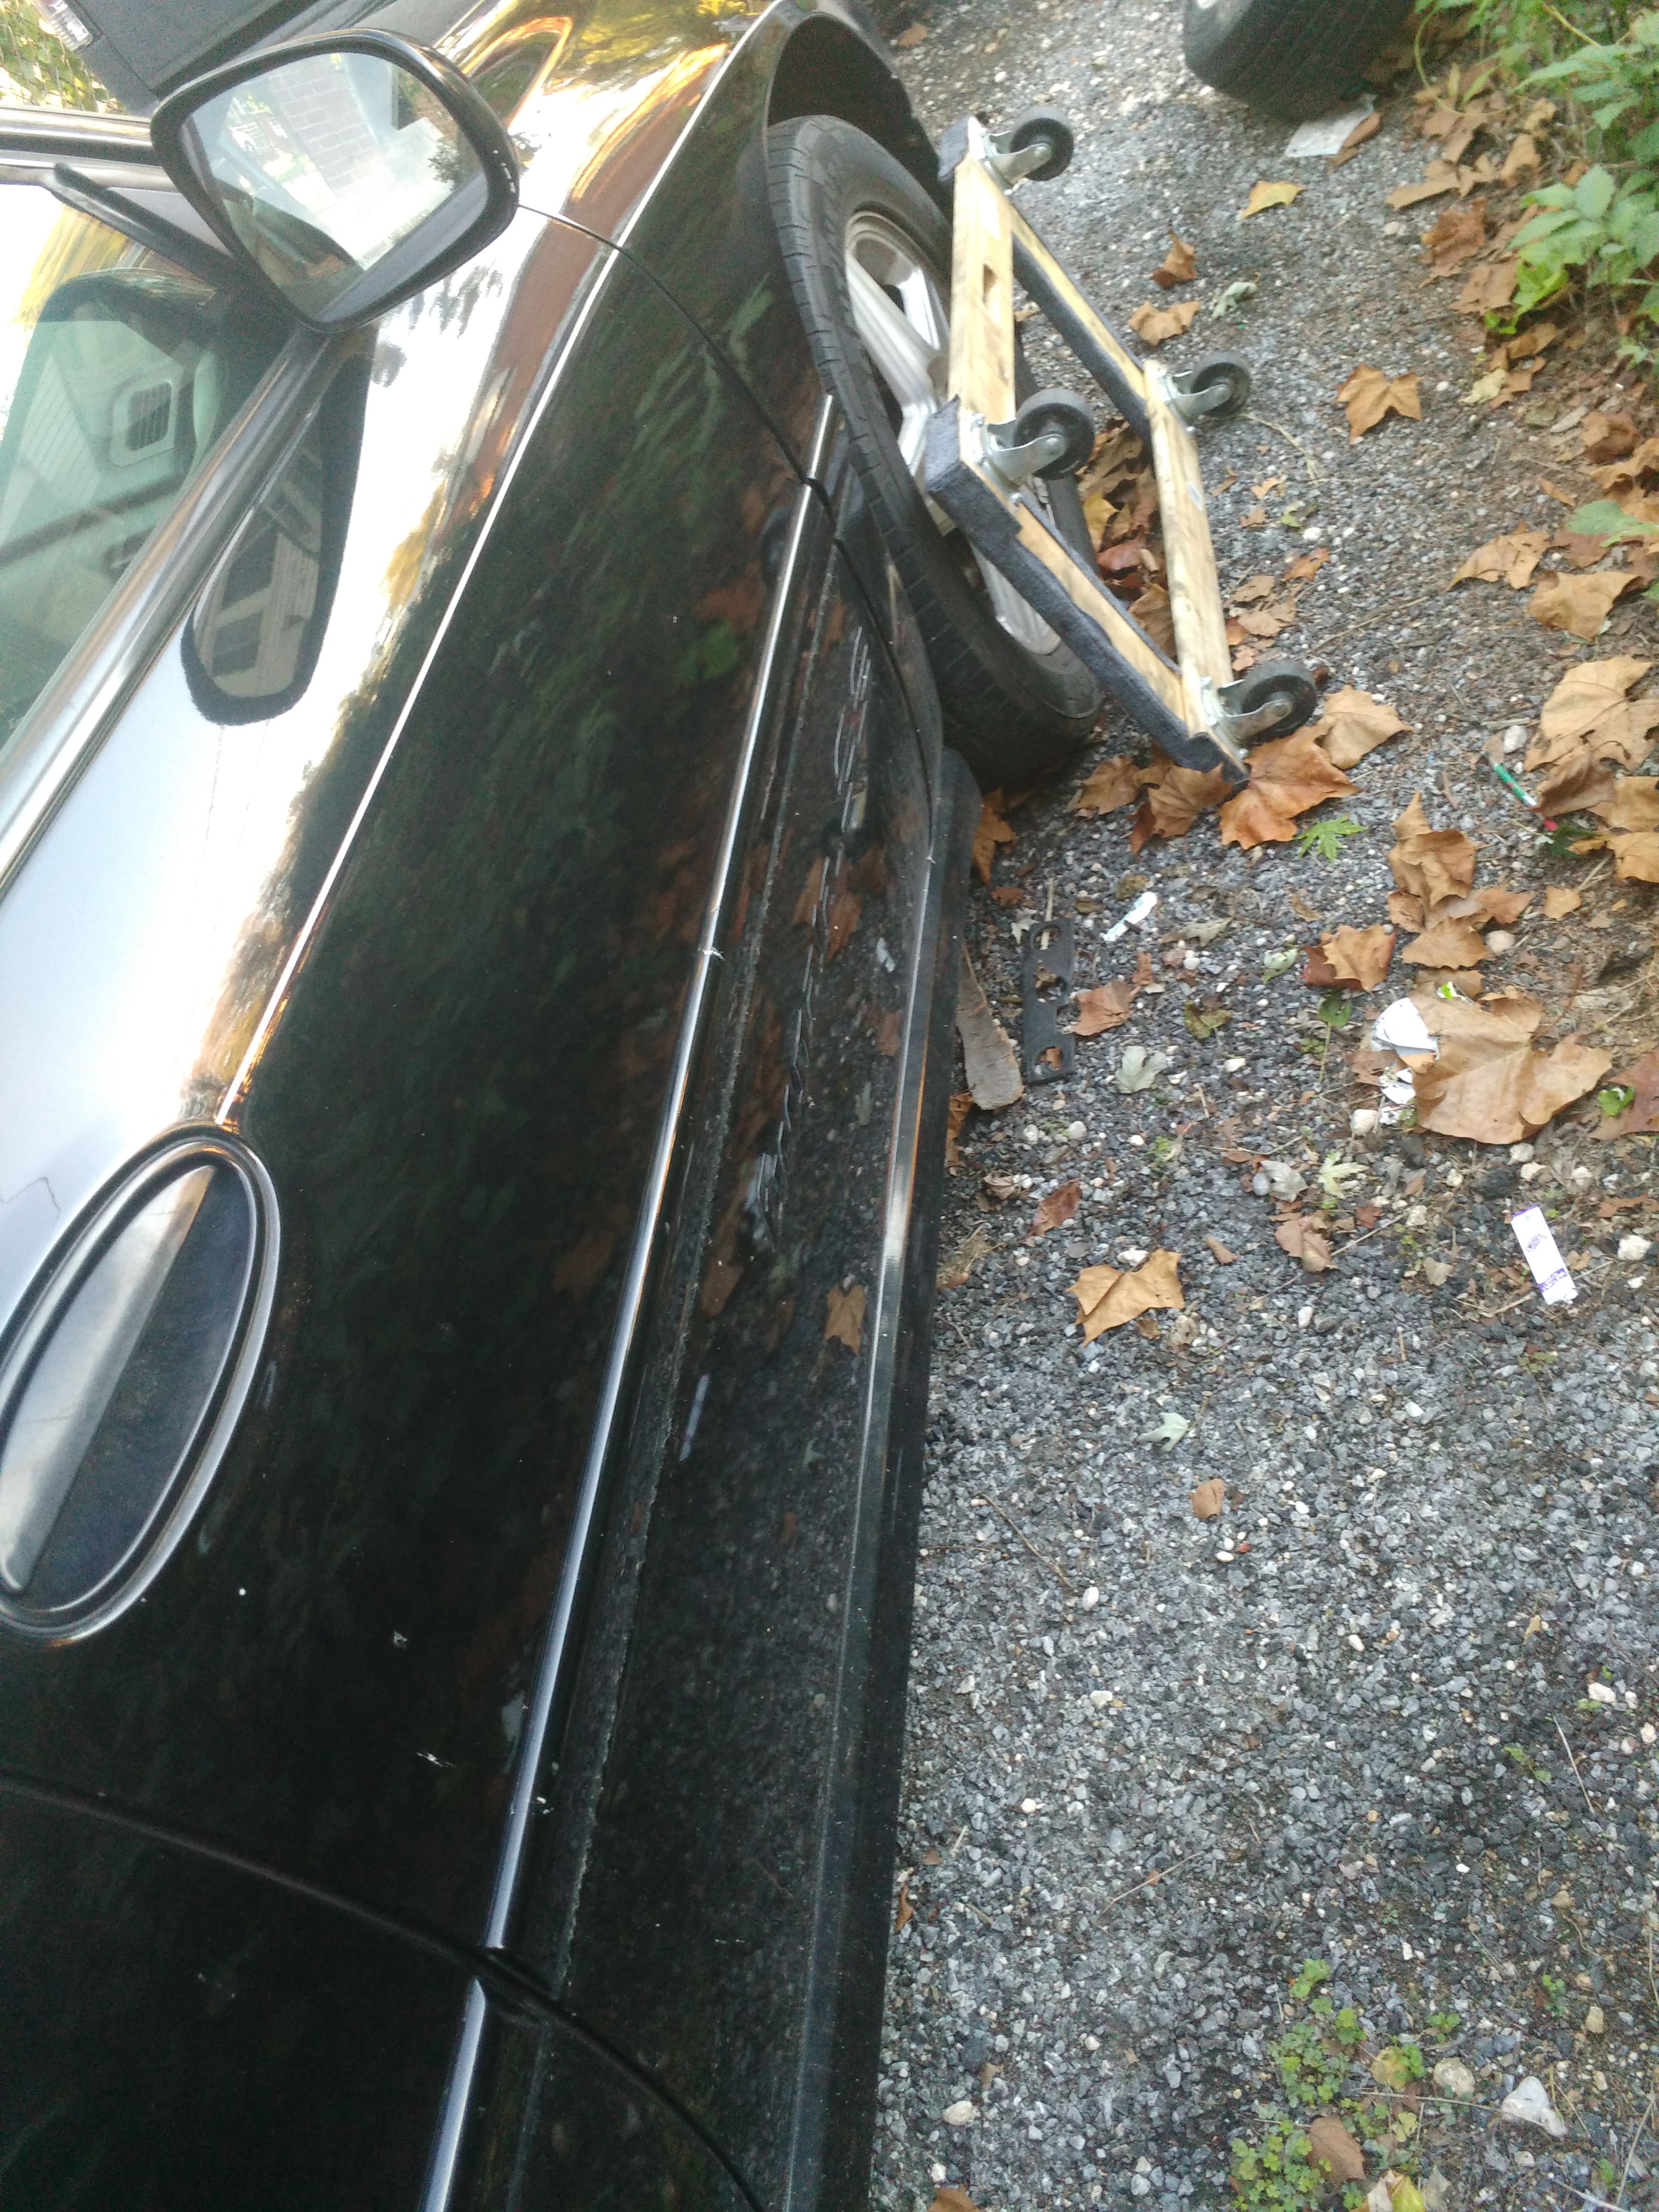 04 ss impala parts for sale engine bad everything else good let me now what u need